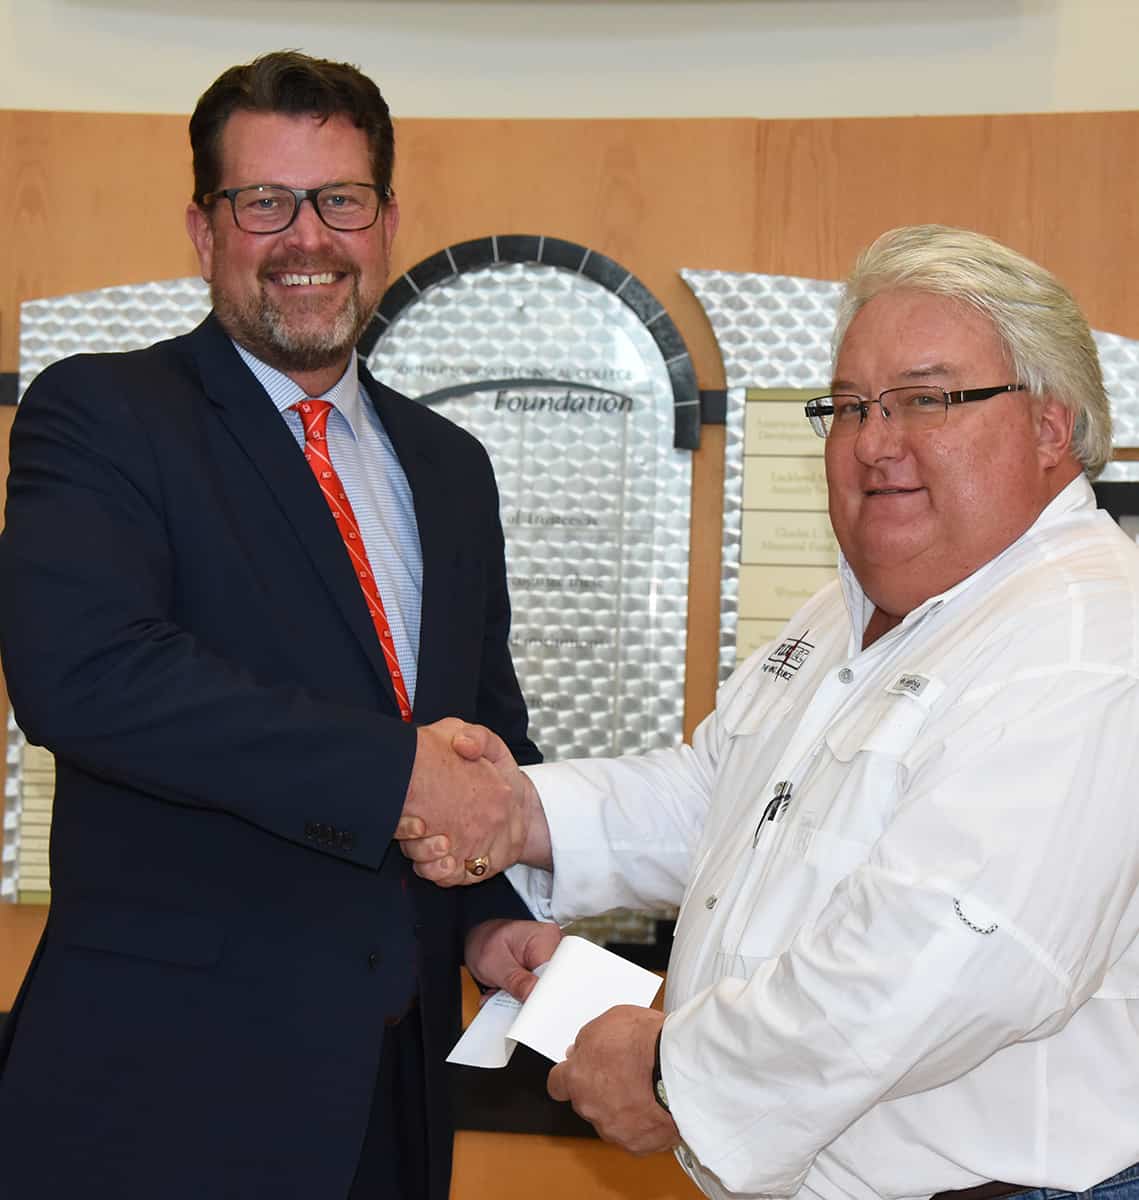 South Georgia Technical College President Dr. John Watford is shown above (l) accepting a donation for a new endowed Flex-Tec scholarship at South Georgia Technical College from Flex-Tec Plant Manager Rick Barnes.